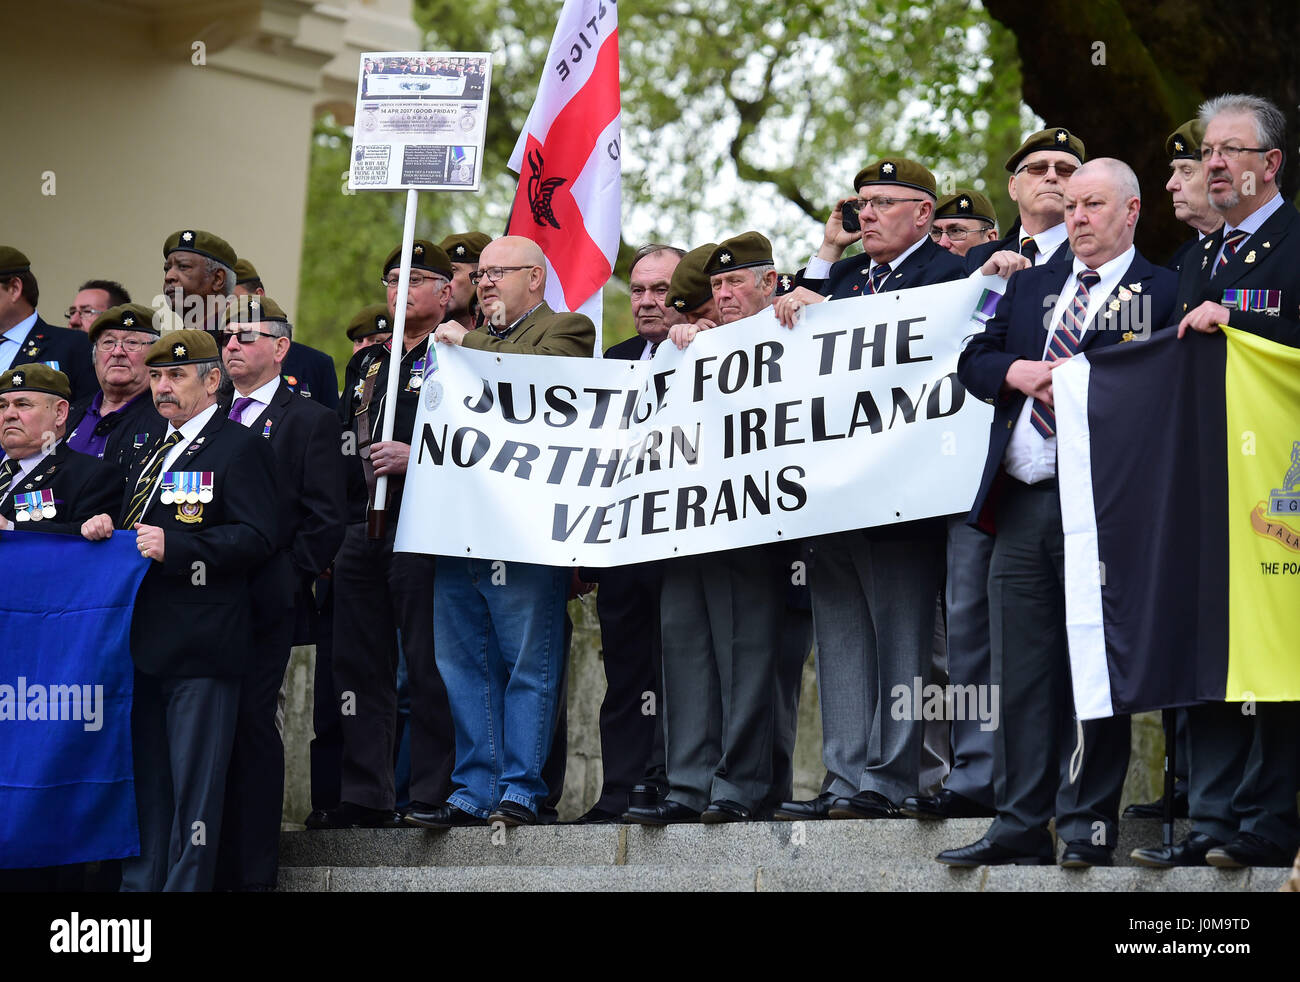 Protesters at a military veterans' rally at Horse Guards Parade in London, organised by Justice for Northern Ireland Veterans (JFNIV) which is seeking to highlight what it alleges is a legal witchhunt against former security members who served during the Troubles. Stock Photo